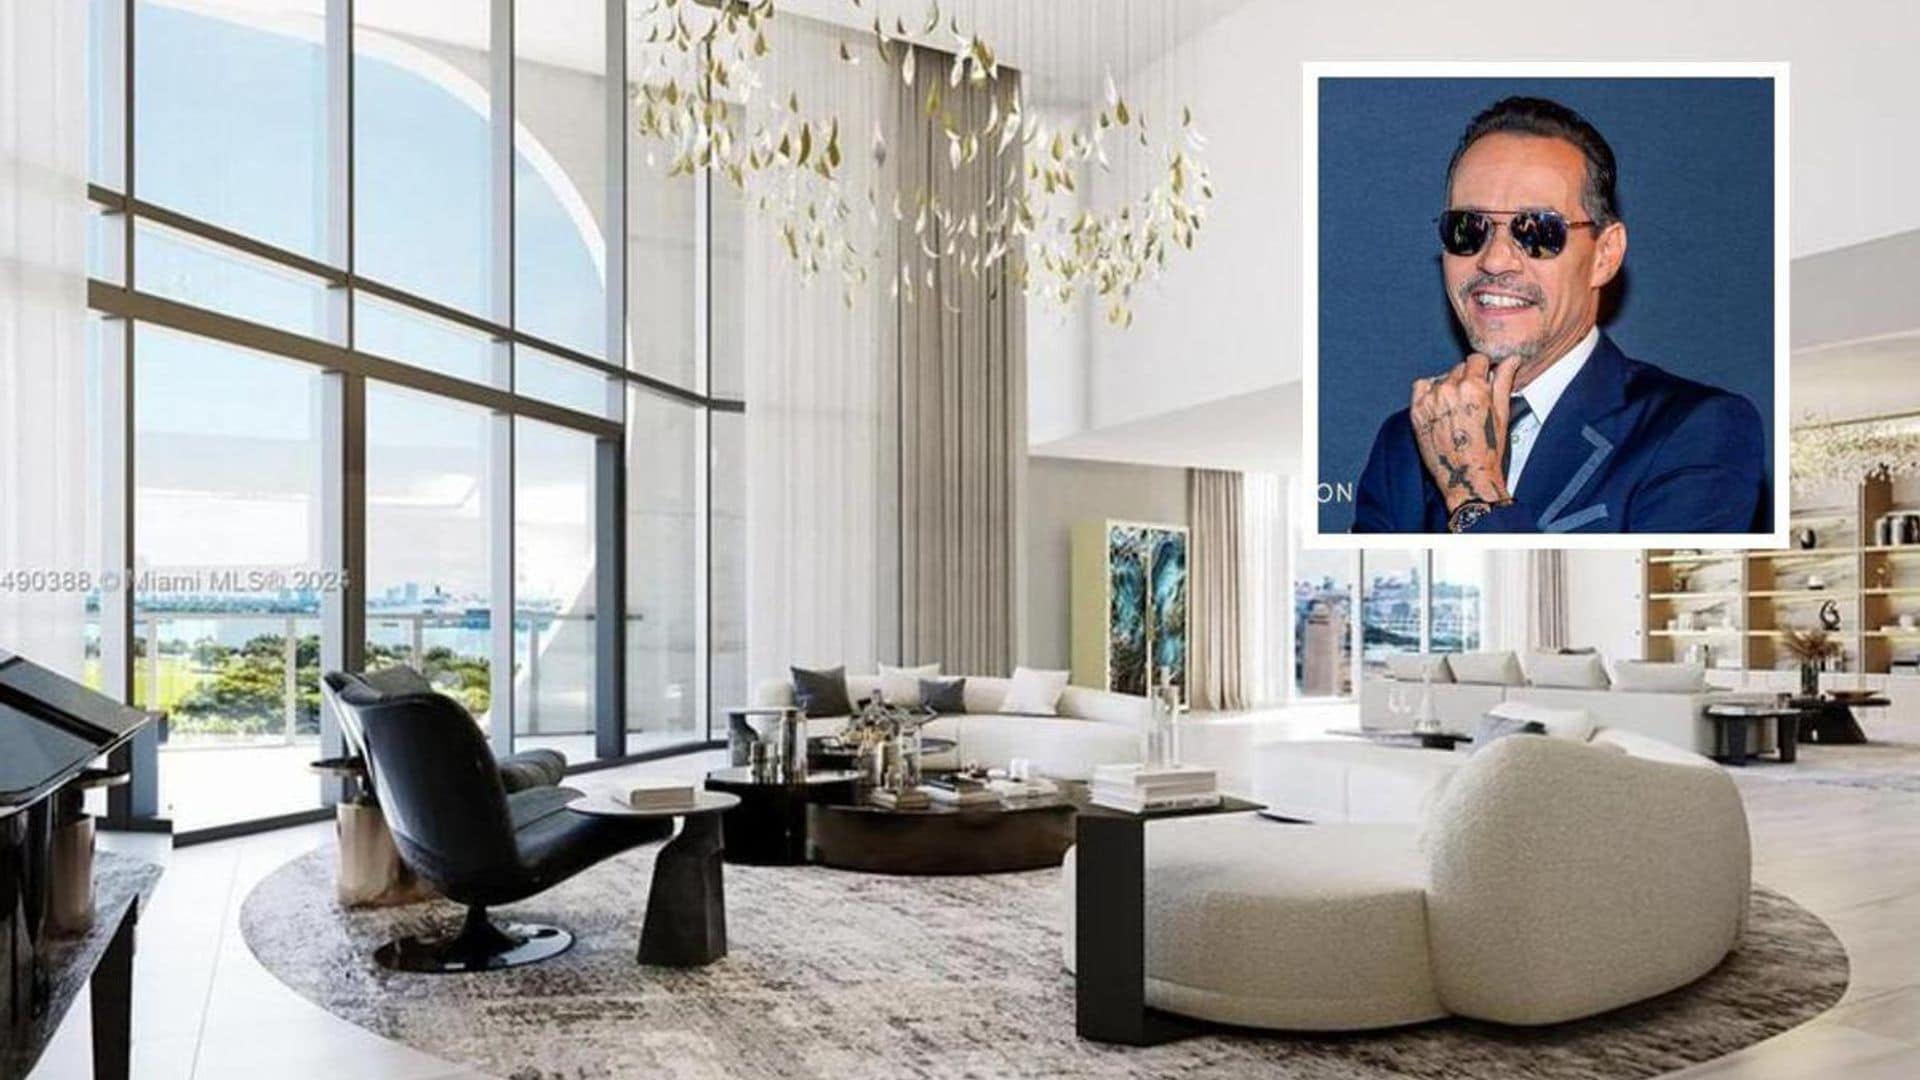 Marc Anthony’s Miami apartment is listed for sale at 11 million dollars